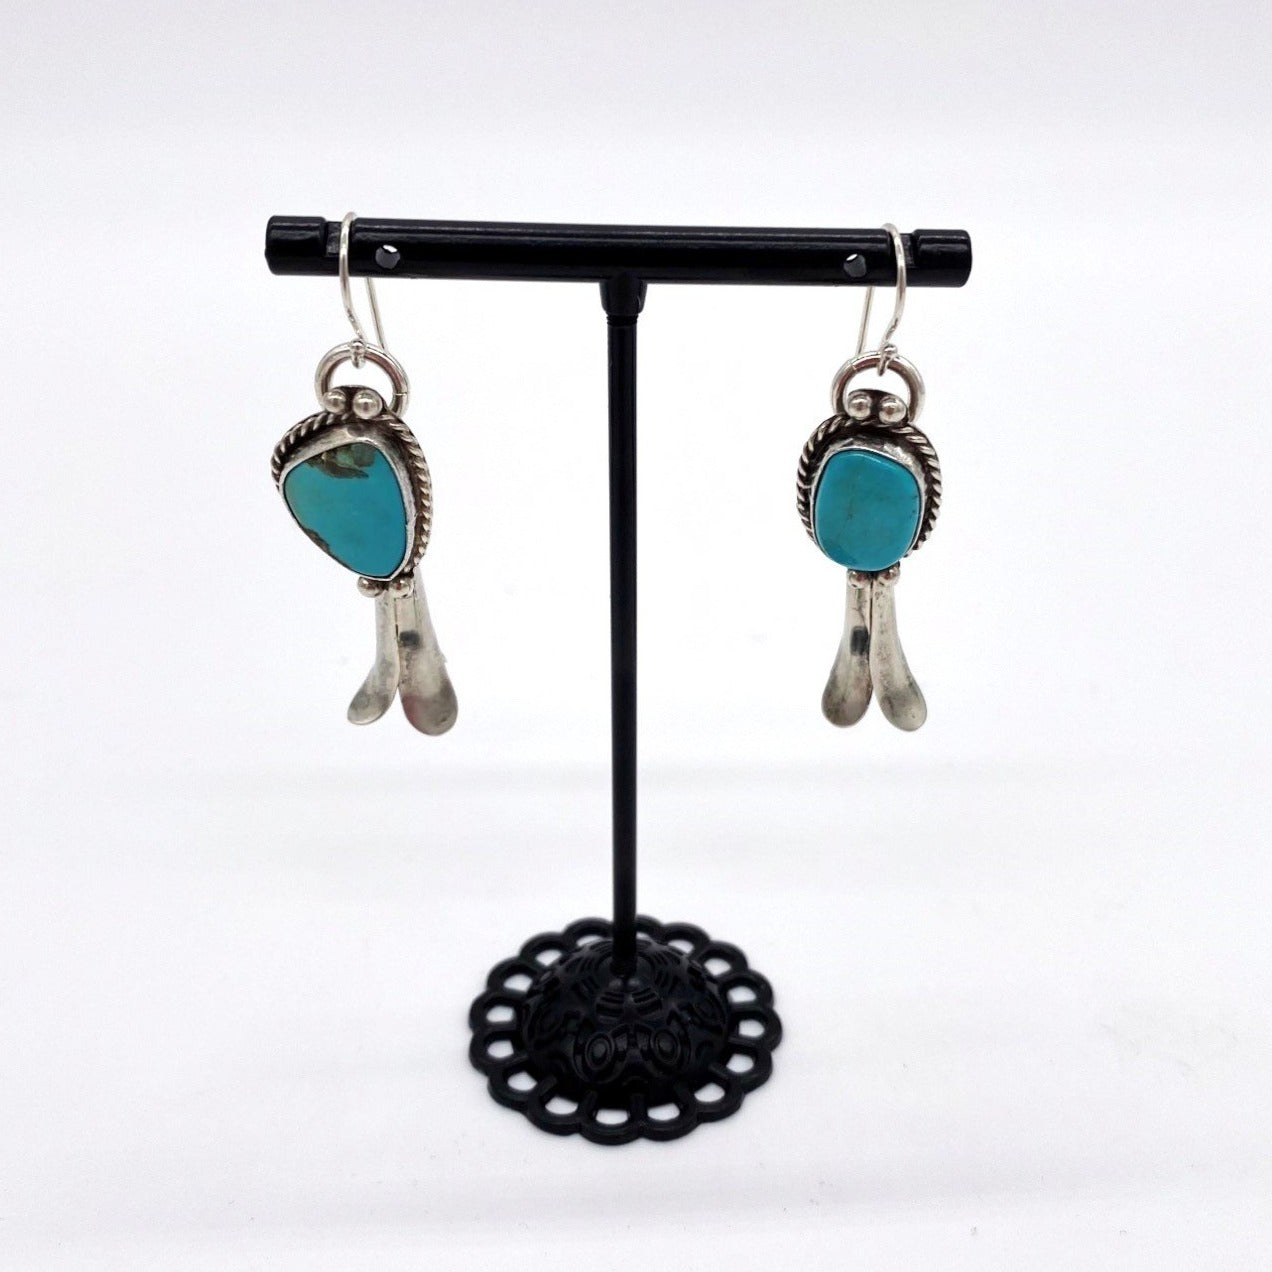 Blossom Convertible Earrings with Turquoise and Car